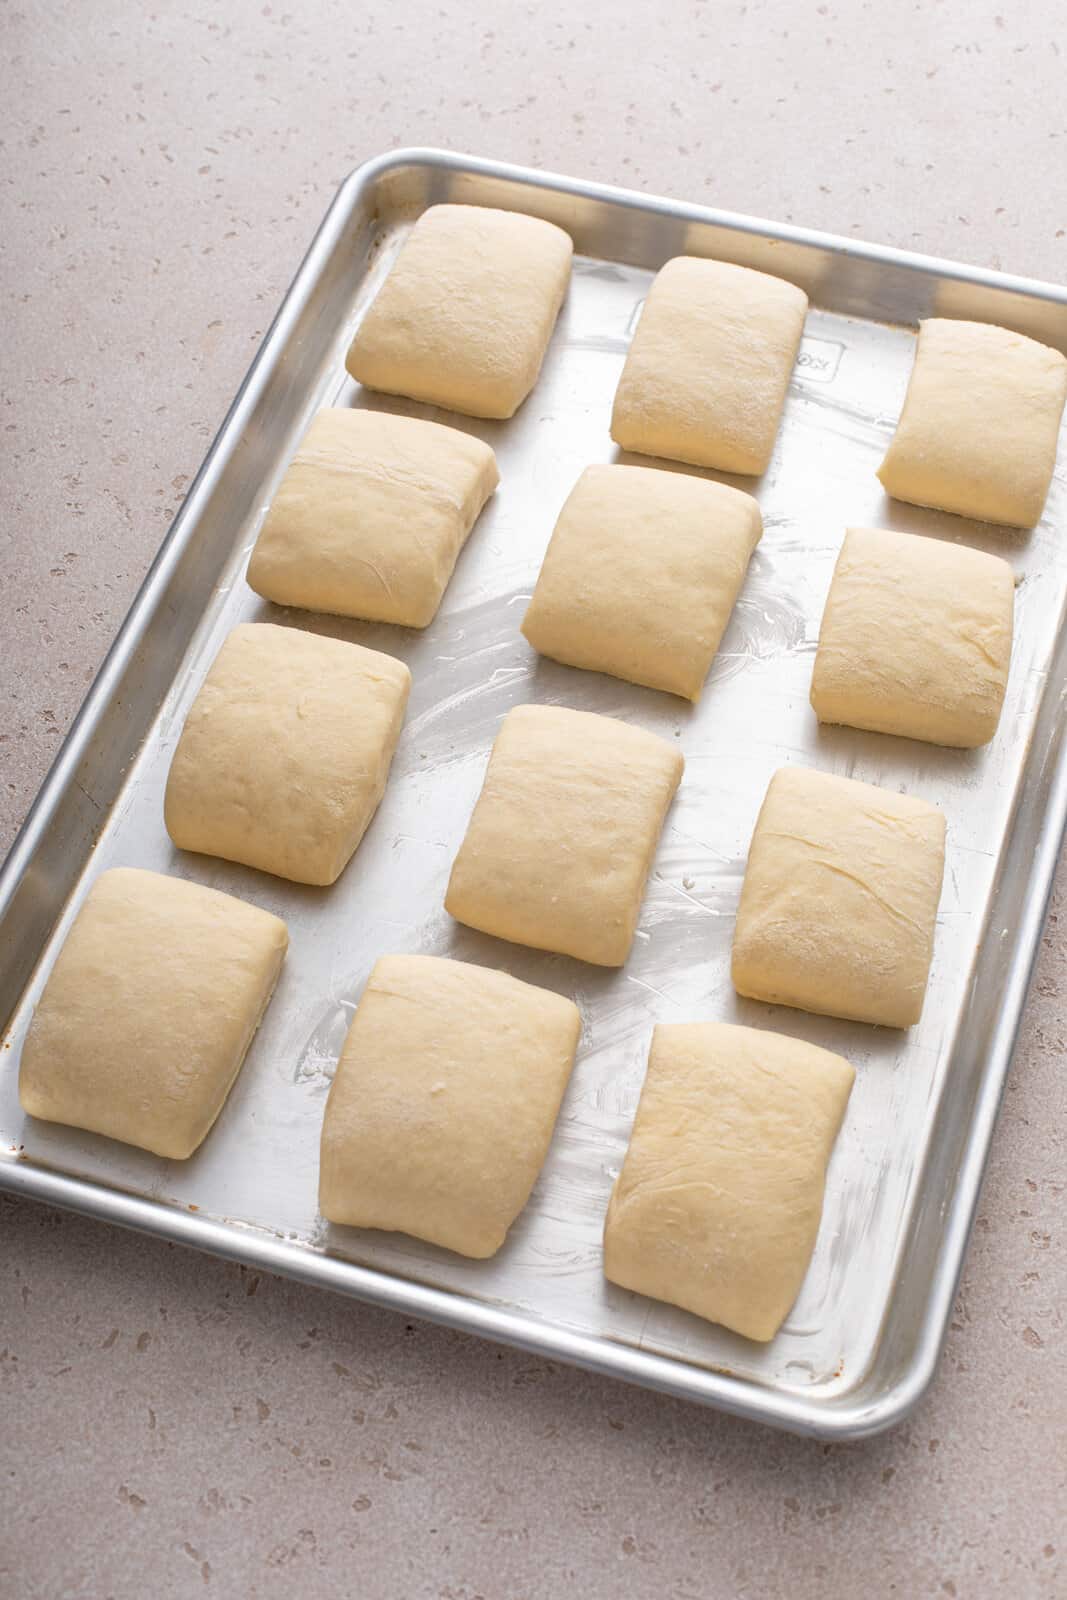 Unbaked texas roadhouse rolls ready to go in the oven.